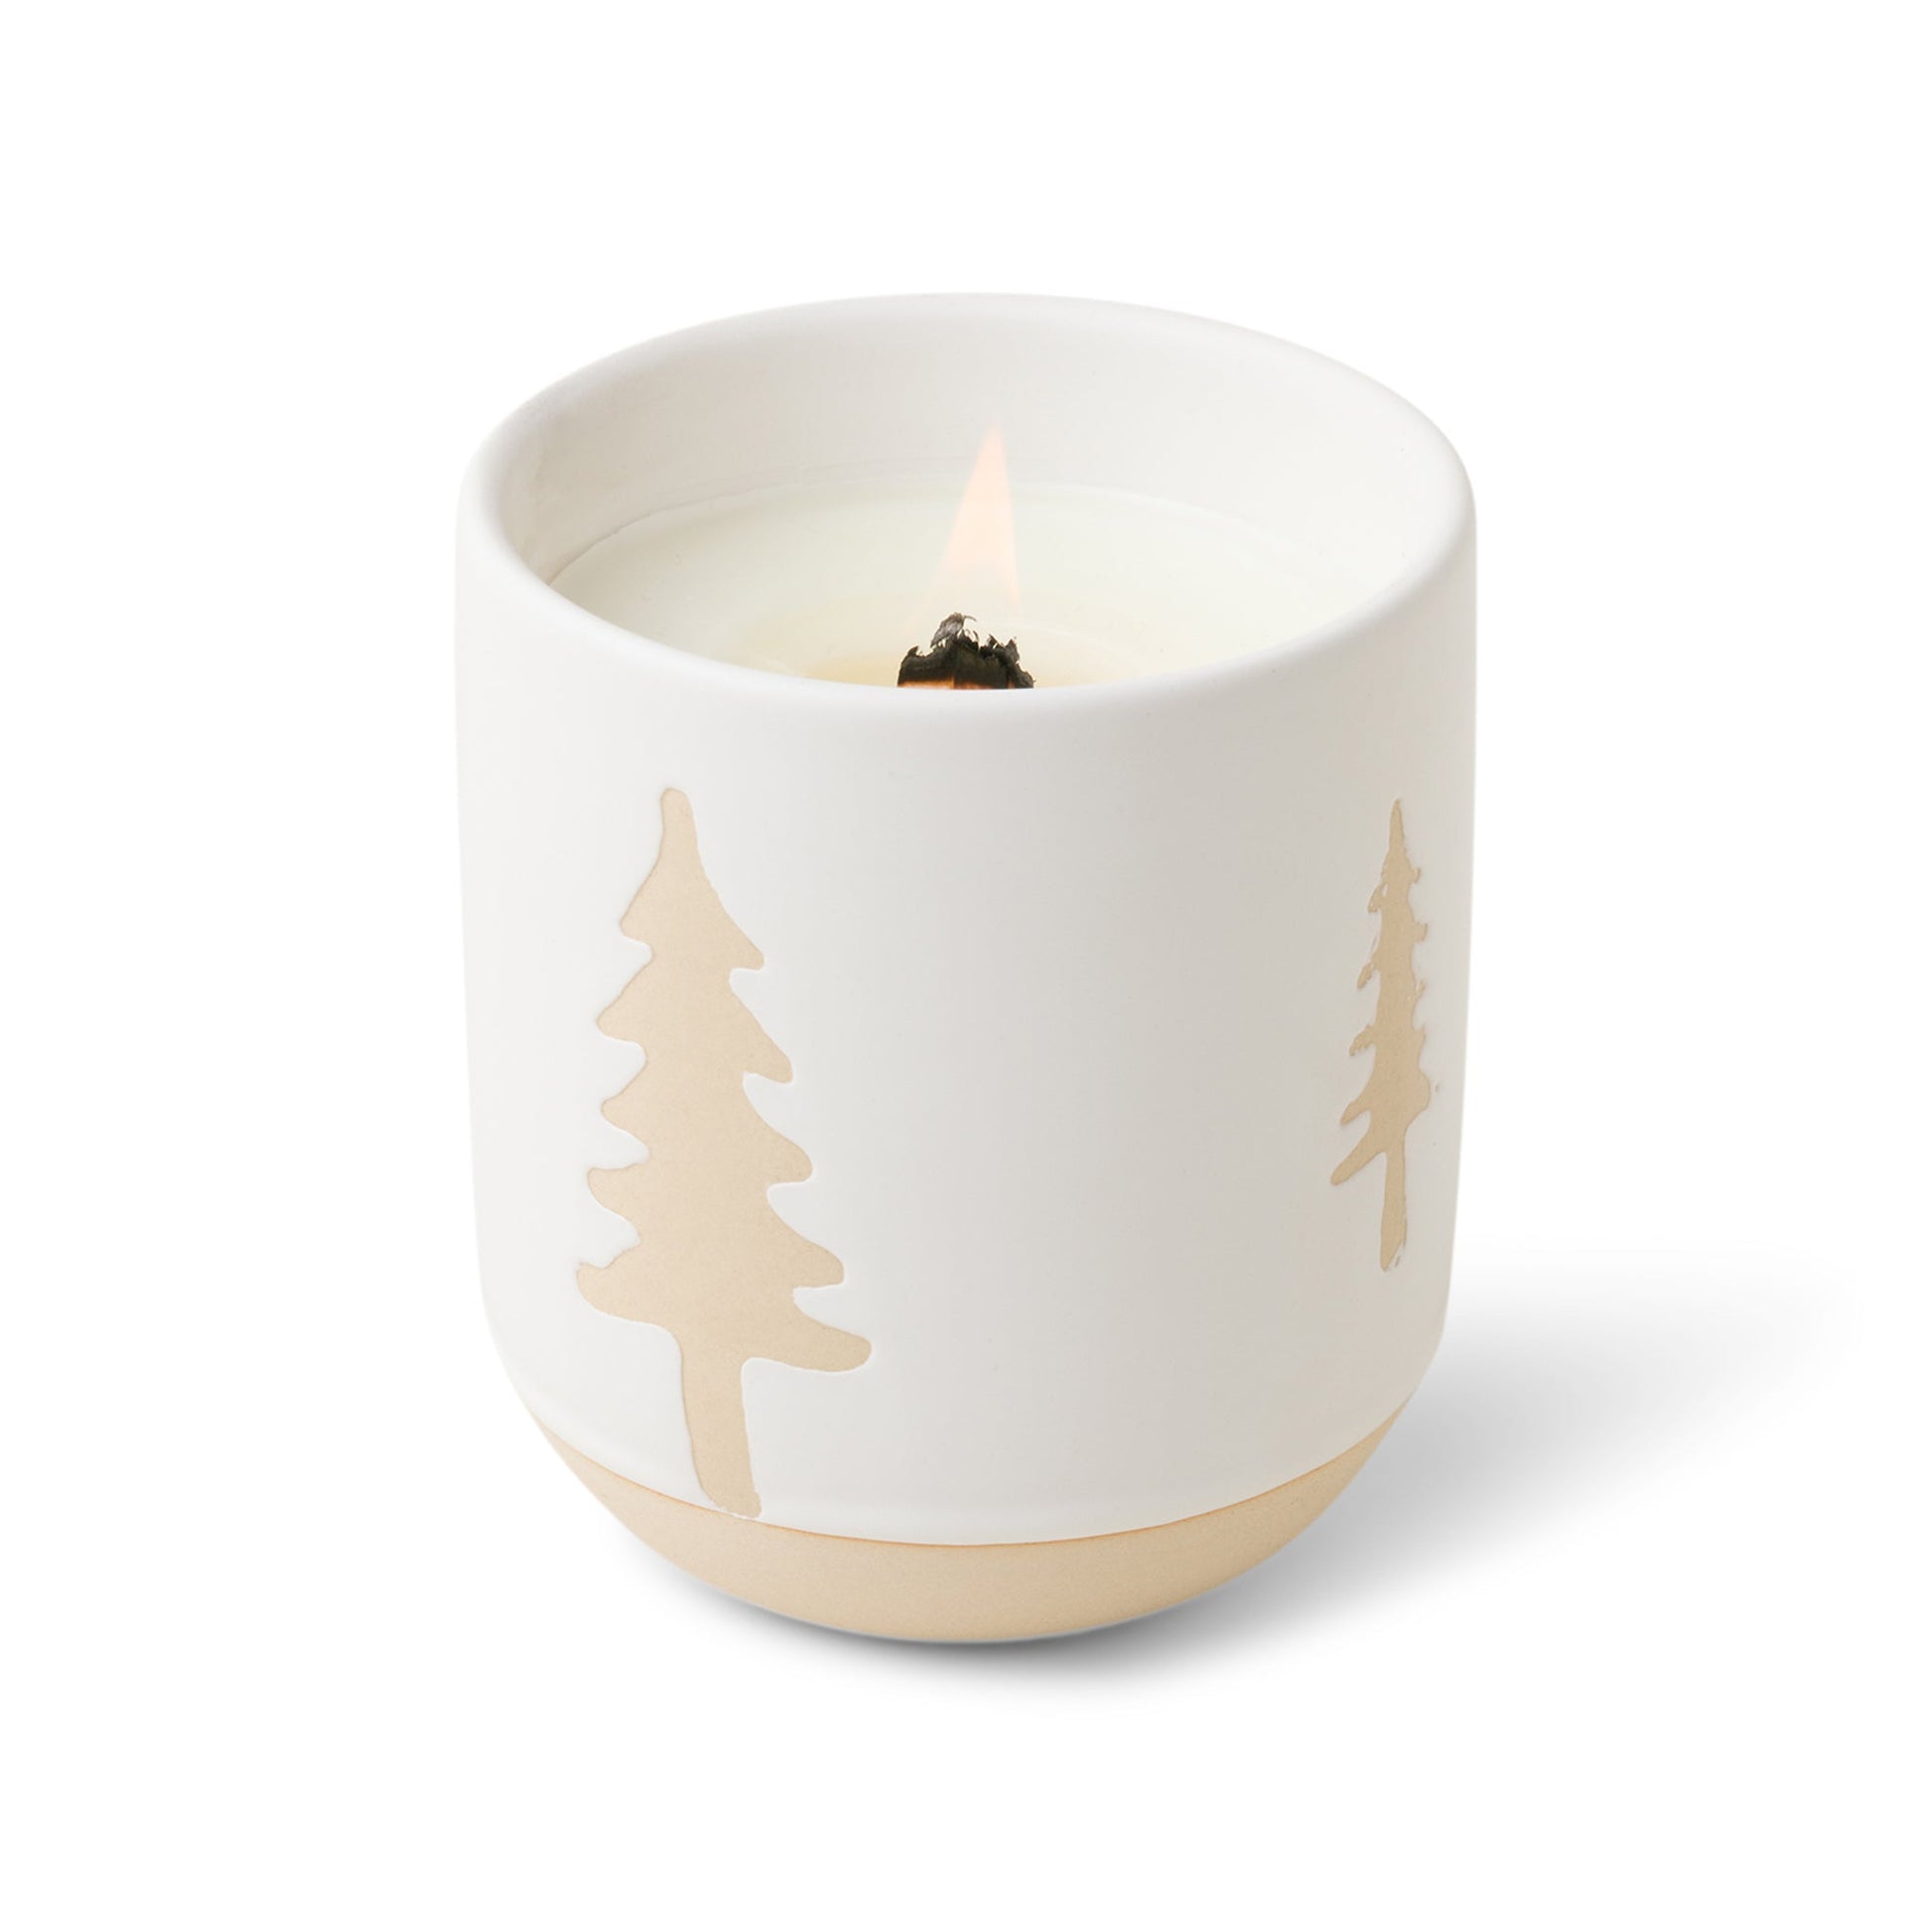 WoodWick Frasier Fir 2 oz Reed Diffuserat Candles To My Door